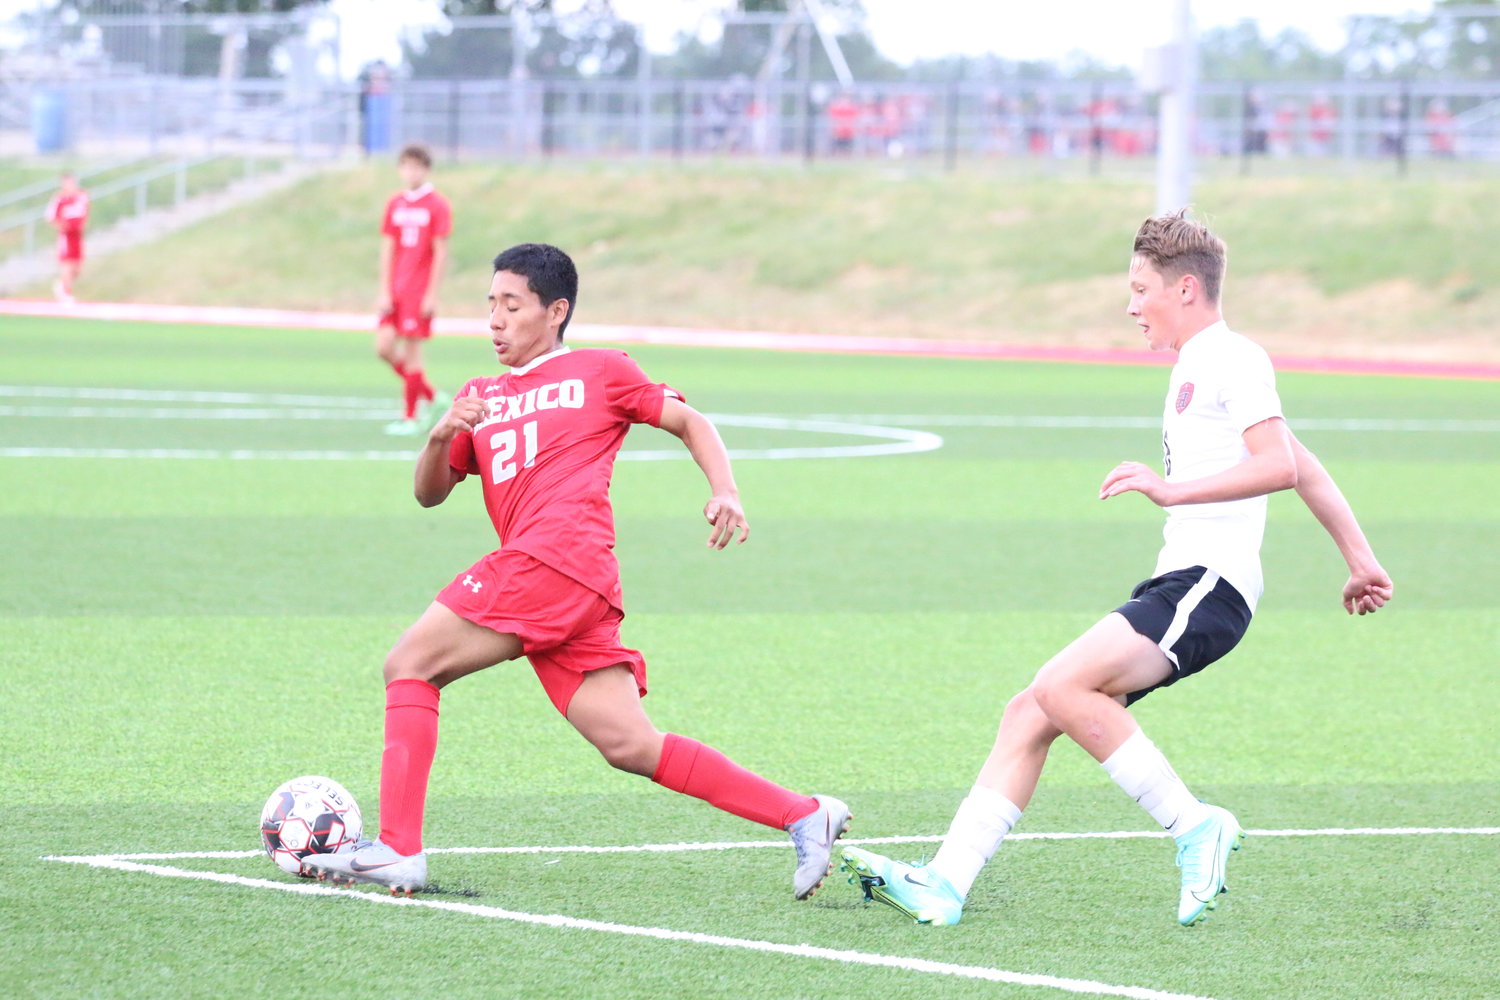 Bulldogs midfielder Fernando Guzman tries to get something started on Tuesday against Hannibal. [Dave Faries]